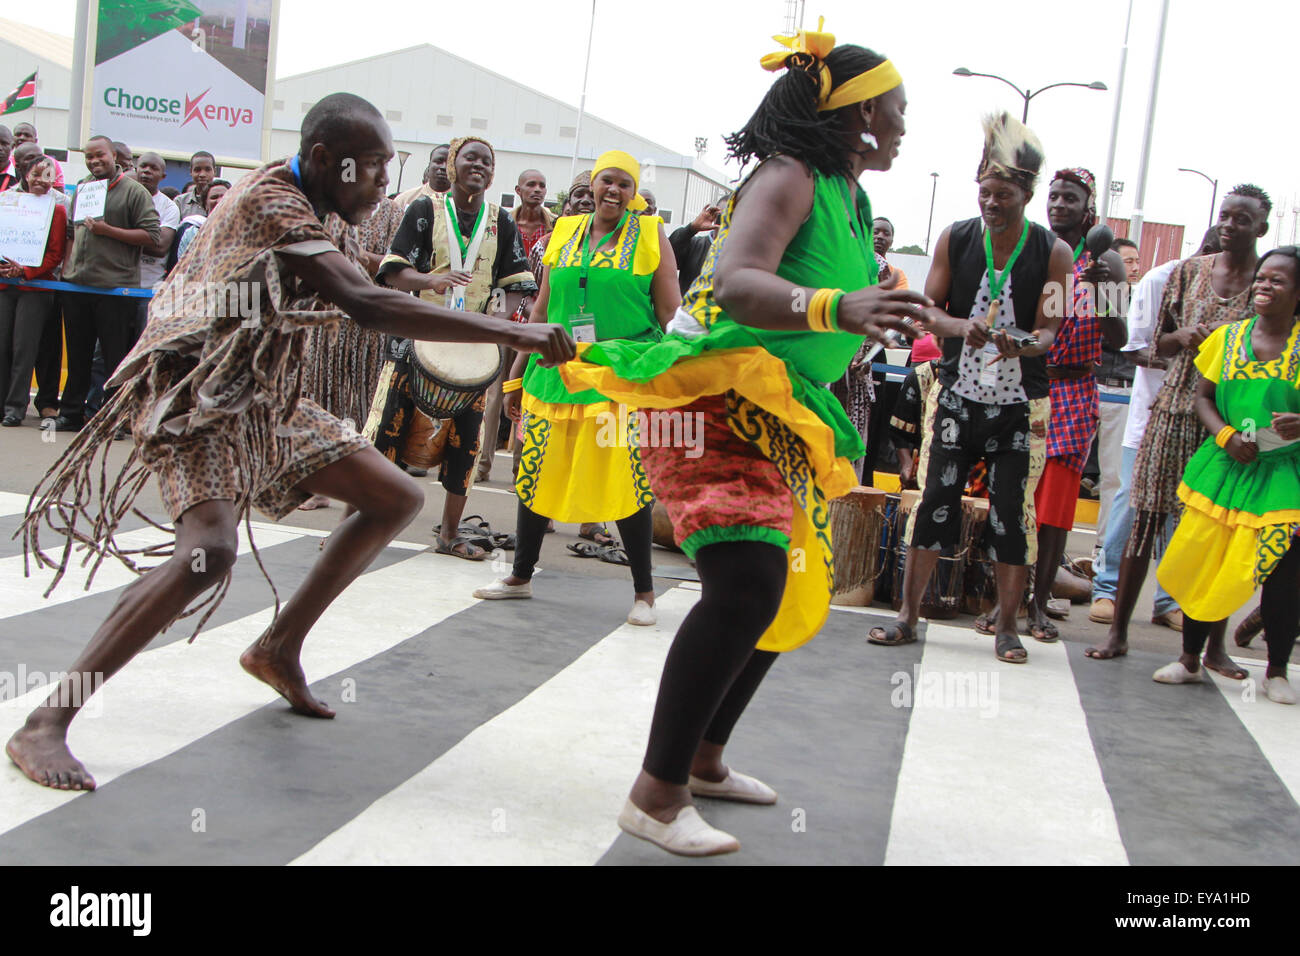 Nairobi, Kenya. 24th July, 2015. Kenyan Traditonal Dancers from Boma Group Enterntains Guest as they arrive Jomo Kenyatta International Airport (JKIA) before the arrival of US president Barack Obama in Nairobi Kenyan capital. US President Barack Obama is on a three-day visit to Kenya, his first to his ancestral homeland since becoming president, he will open Global Entrepreneurship Summit (GES) at the United Nations Office in Nairobi on Saturday. Credit:  Tom Maruko/Pacific Press/Alamy Live News Stock Photo